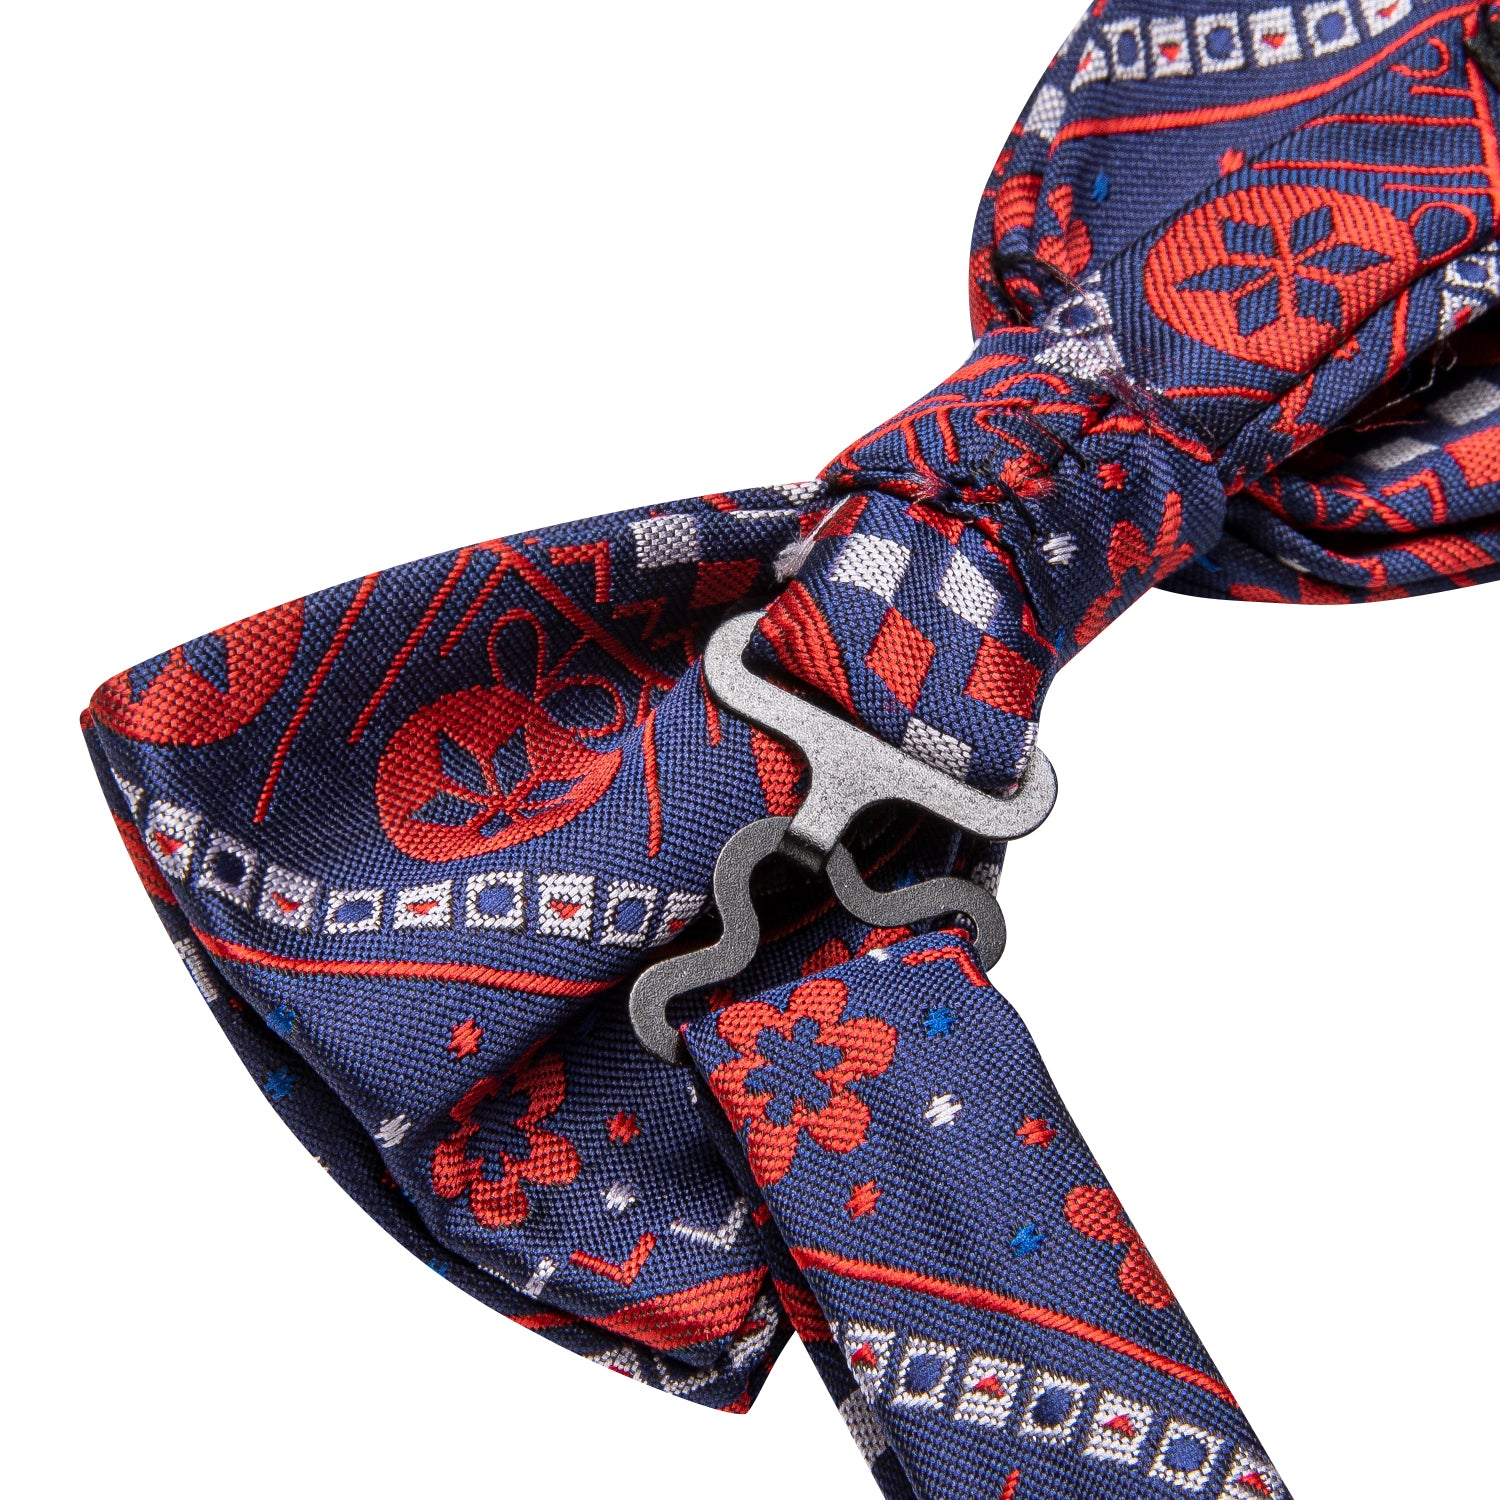 Christmas Blue Red Novelty Pre-tied Bow Tie Hanky Cufflinks Set